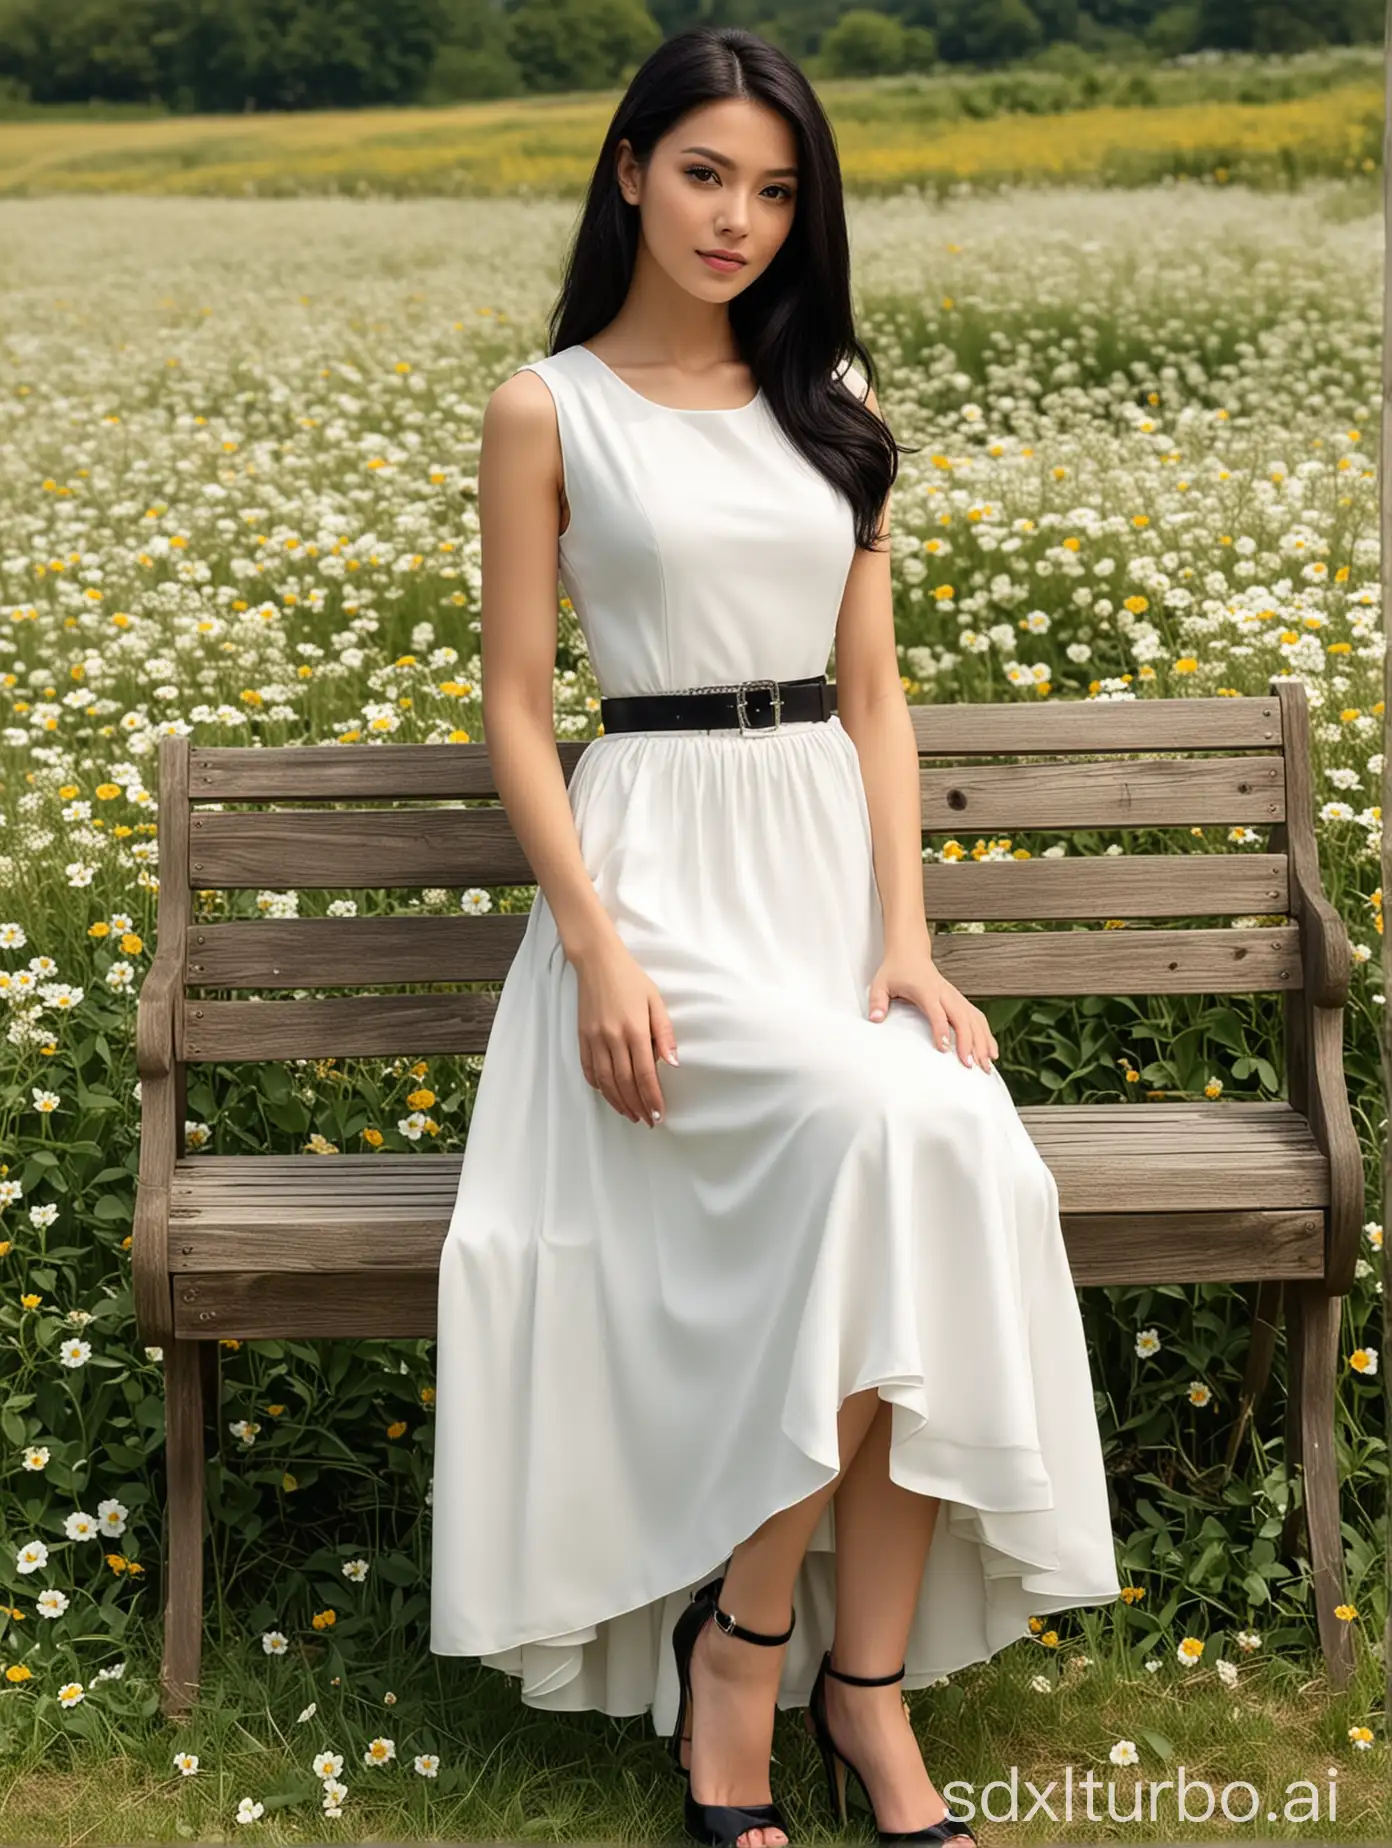 Elegant-Young-Woman-in-White-Dress-Amid-Blossoming-Field